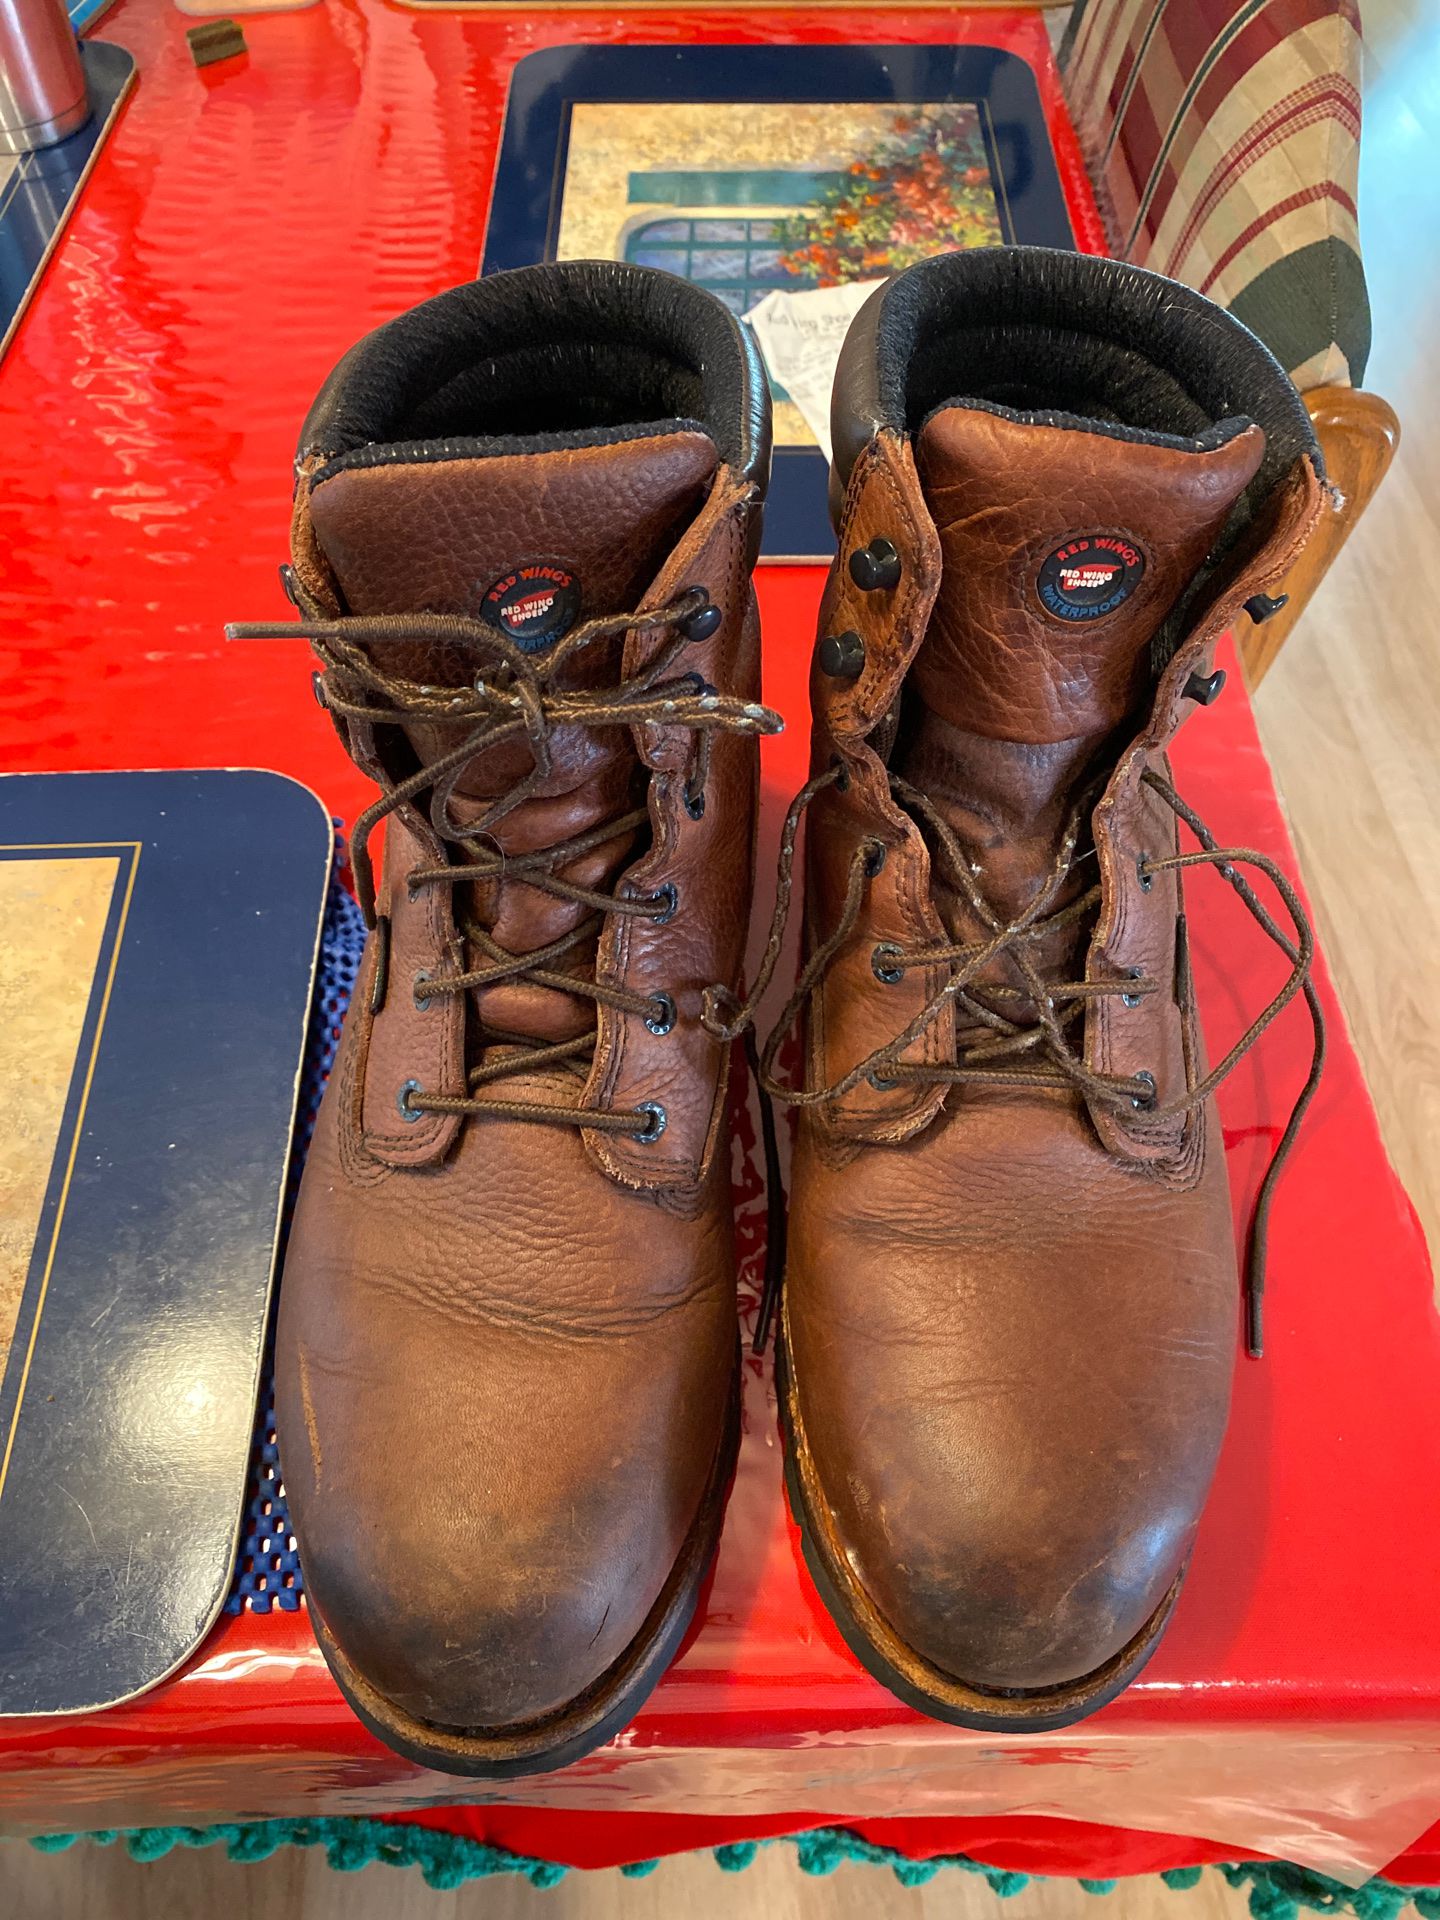 Lightly used red wing waterproof work boots. Paid 170.00 new